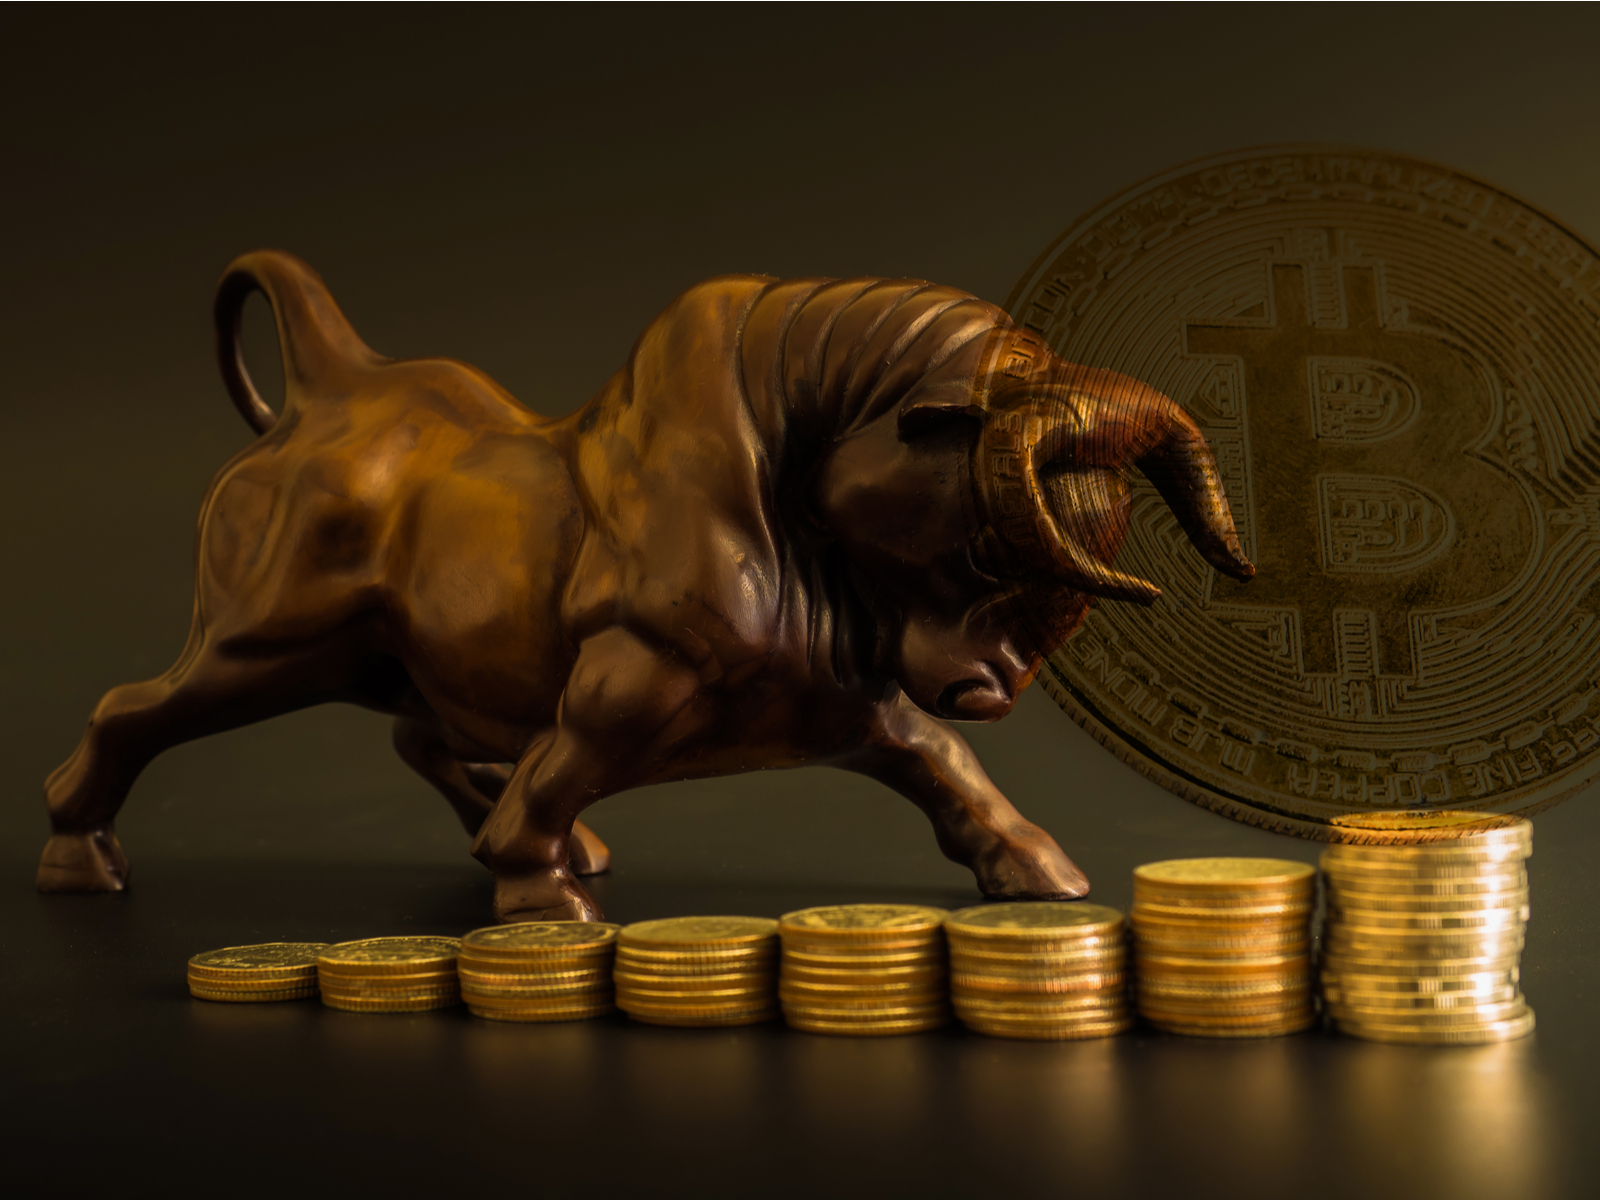 Markets Update: BTC Tests $4,000, BCH and ETH Test $150